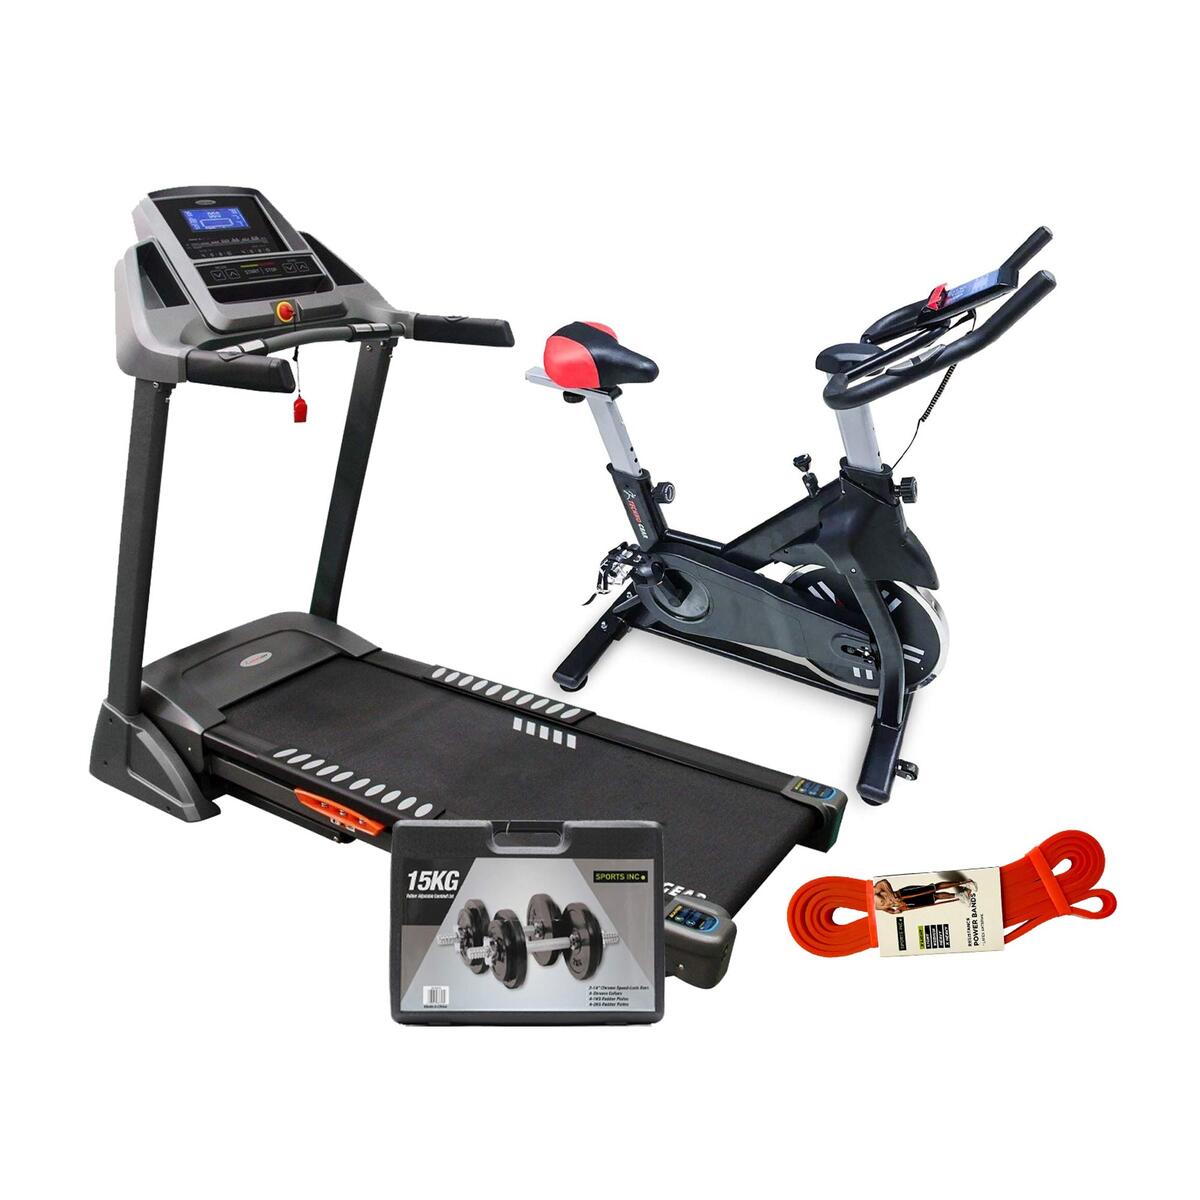 Techno Gear Treadmill ET1501A 2.5HP + Techno Gear Spinning Bike MZ-681 + Sports INC Dumbbell Set W-025-B 15kg + Sports INC Resistance Power Band 64mm VF97660 Assorted Color, 1pc